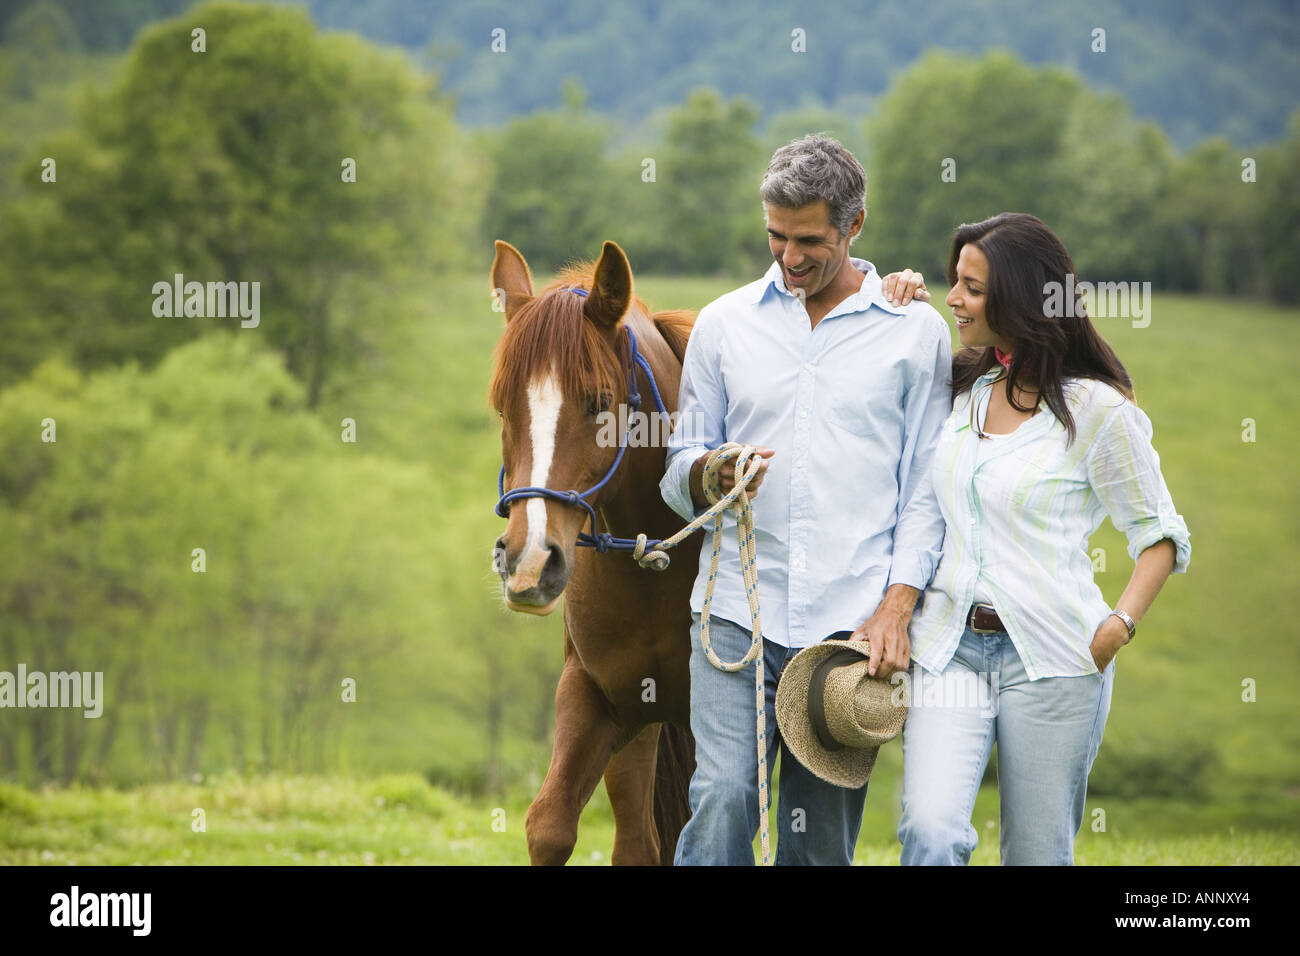 man and a woman walking with a horse Stock Photo